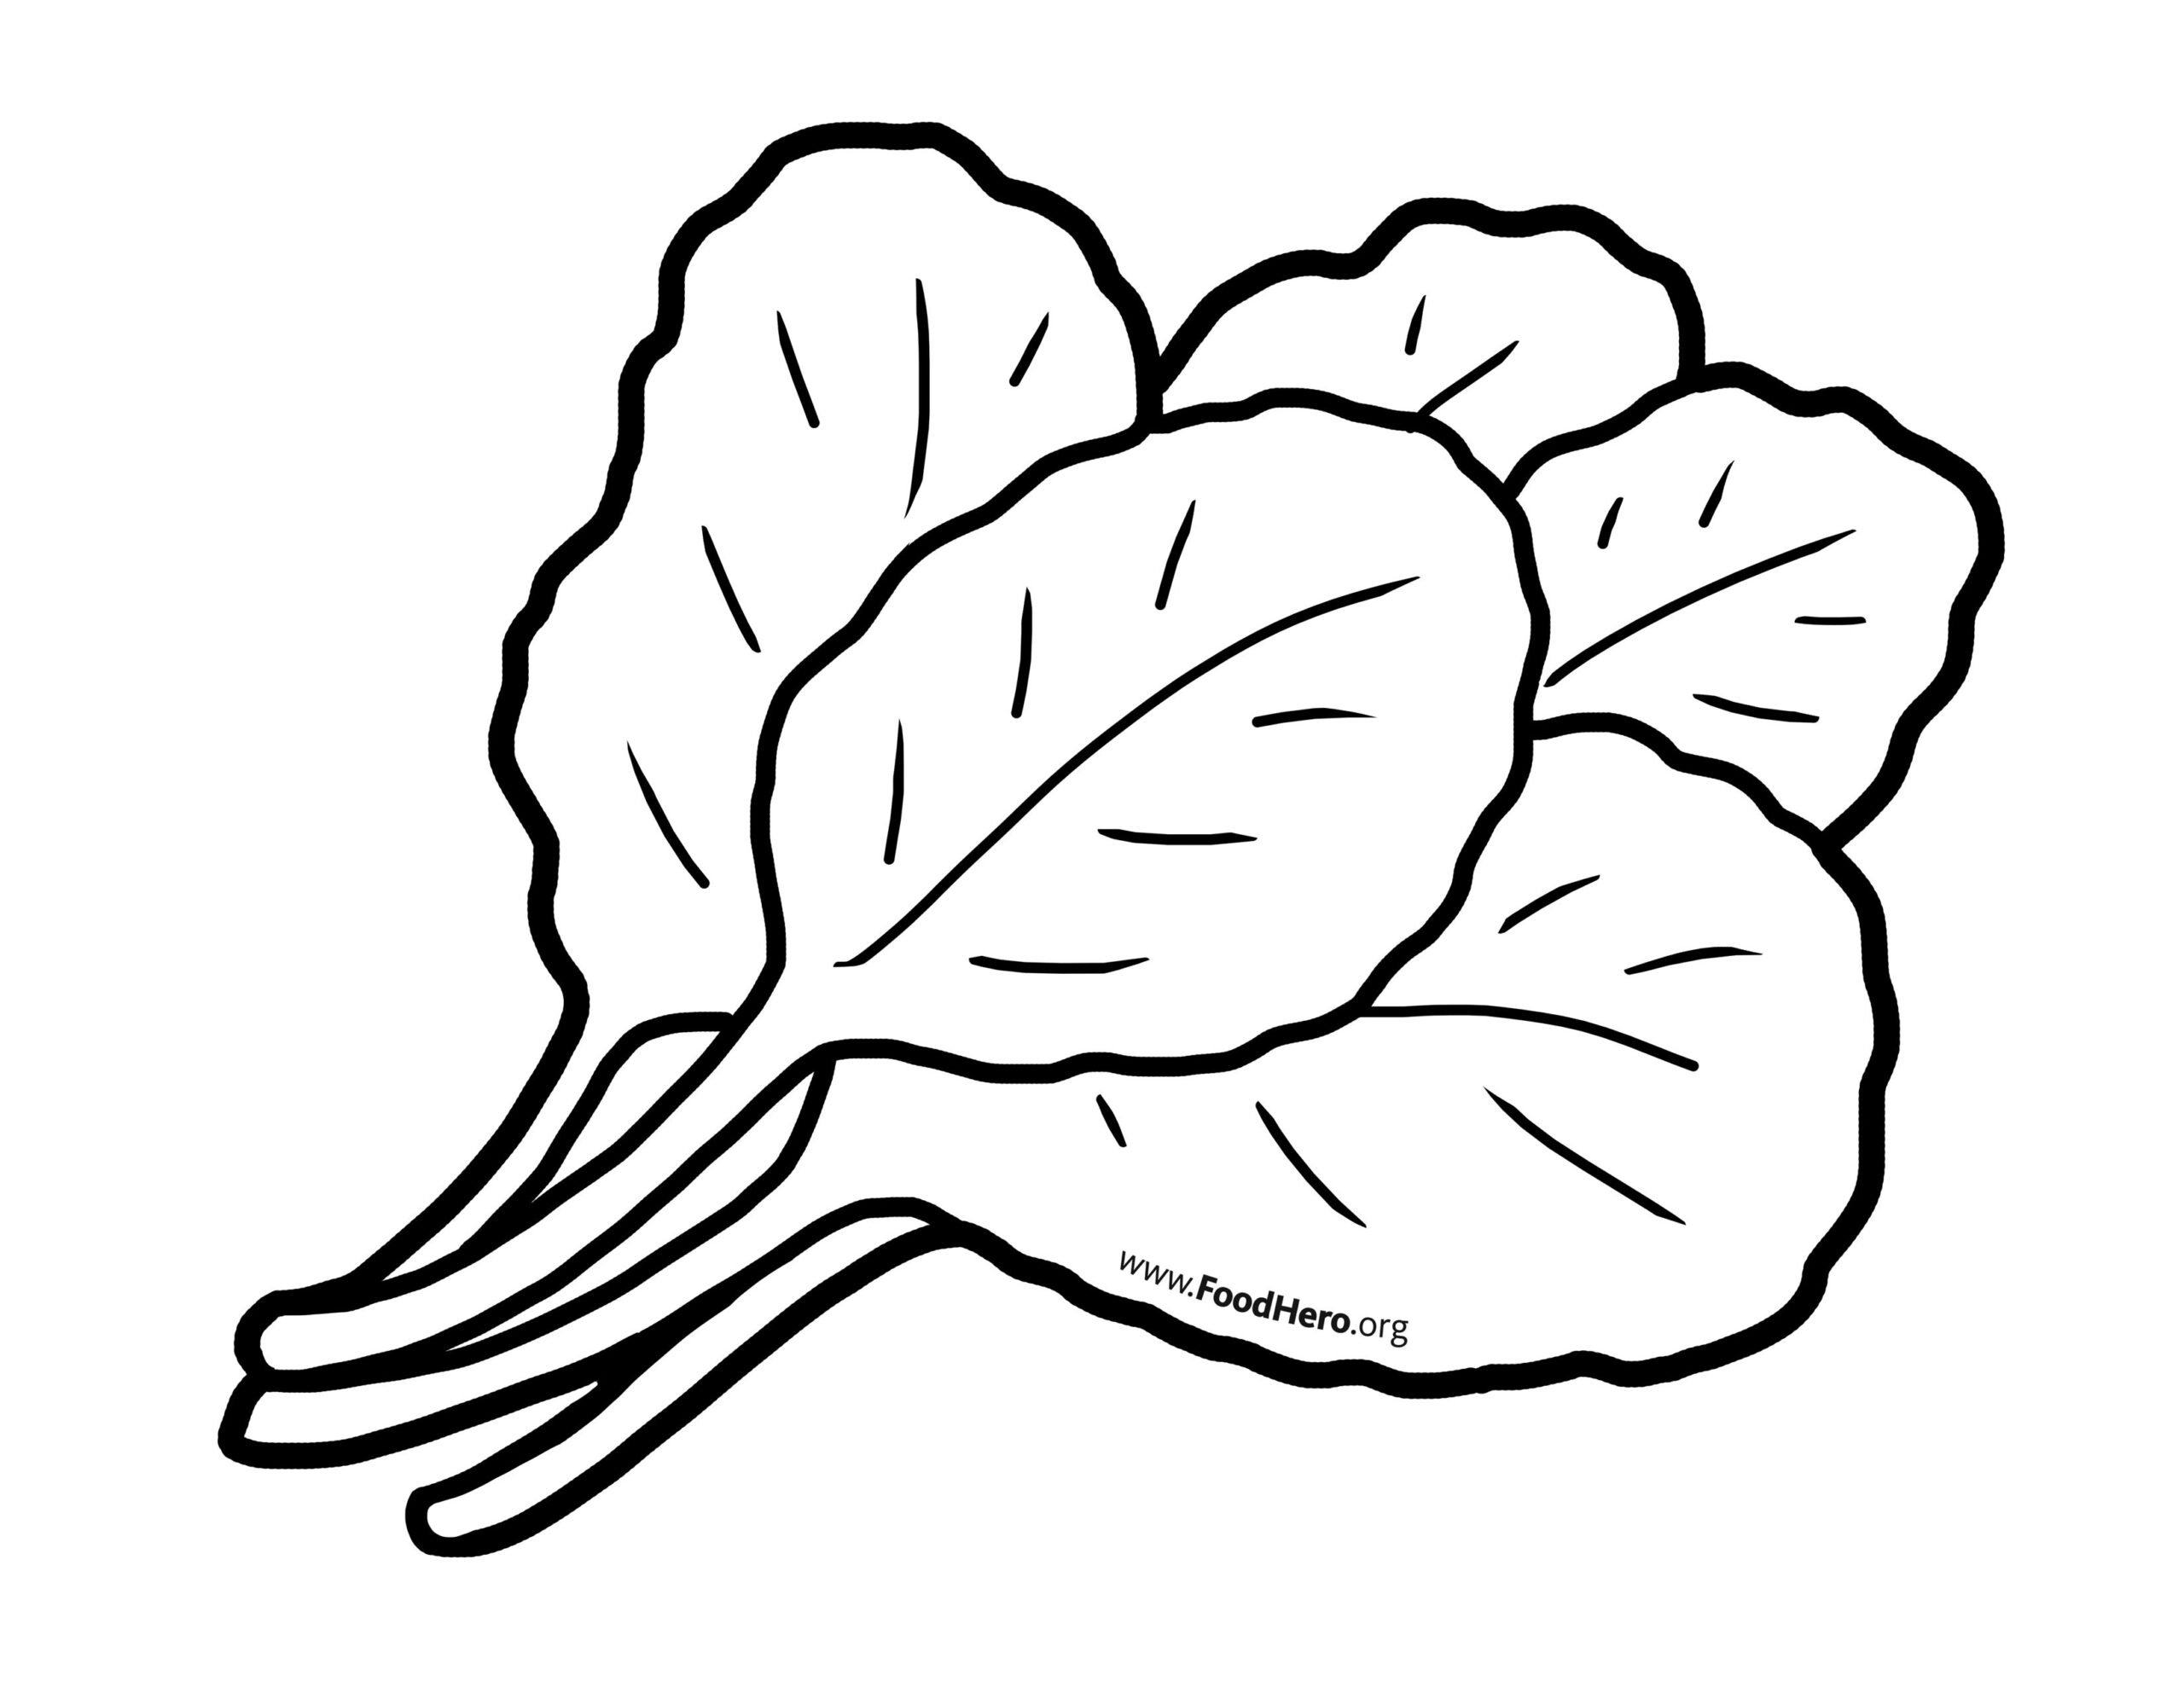 A variety of vegetable doodles. | Vegetable drawing, Drawings, Illustration